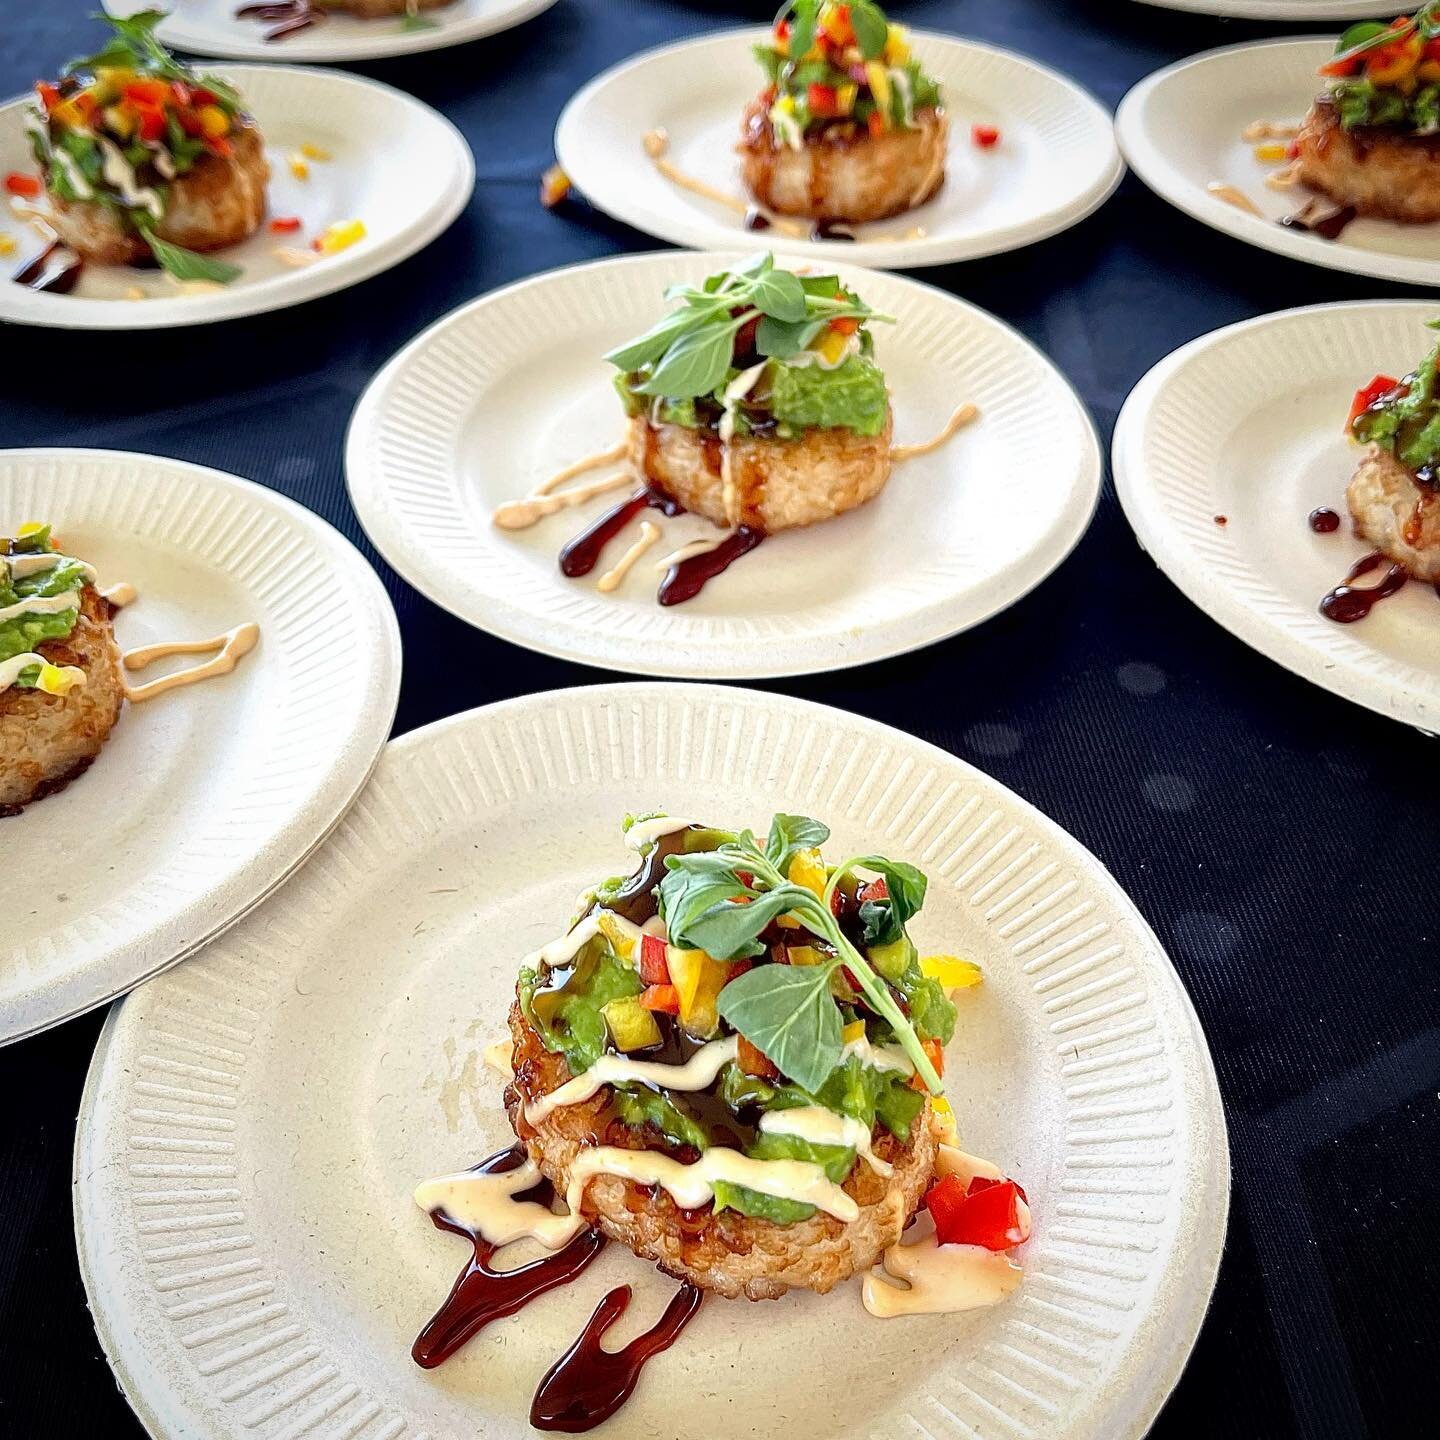 Last Saturday we had the privilege to partake in the @calwinefest 💥 it was a blast! The @ricebrownscrispyrice we featured is easier to make than how it looks 🔥

Micro-greens 
Spicy mayo 
Sweet soy glaze 
Bell peppers 
Avocado
Rice Browns 

You can 